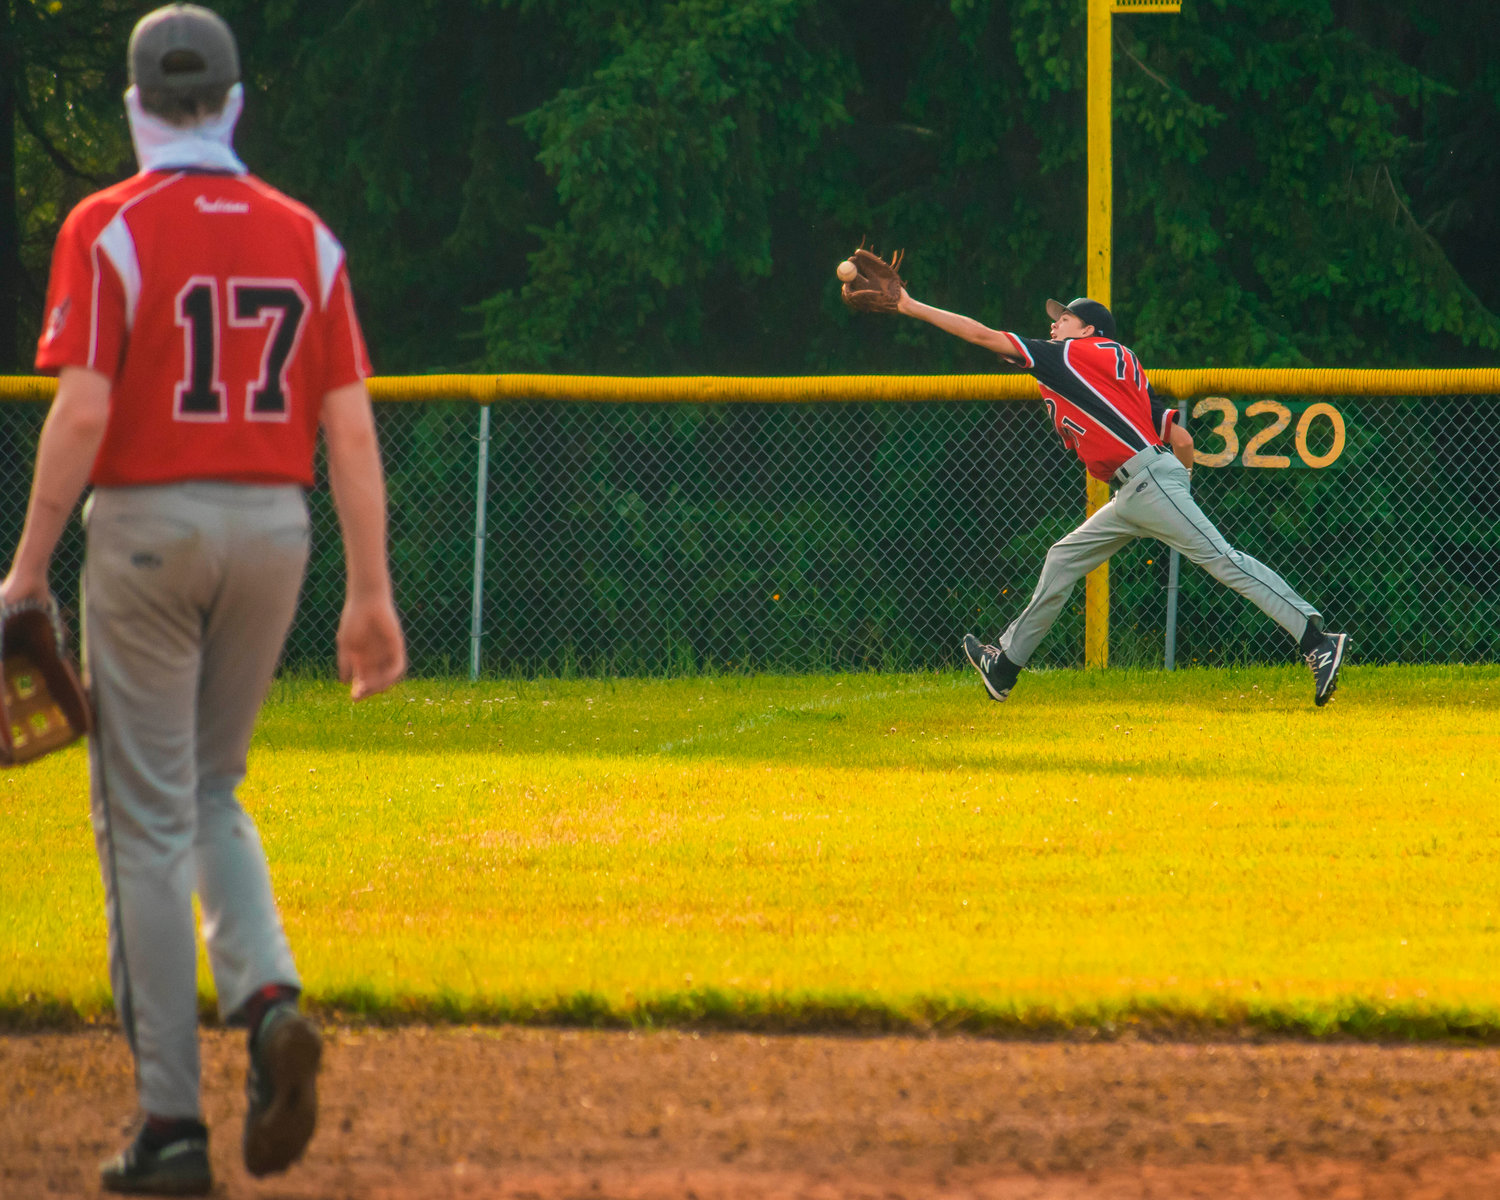 Toledo’s Rogan Stanley (71) stretches to make an out during a game against the Dirtbags Tuesday afternoon in Winlock.